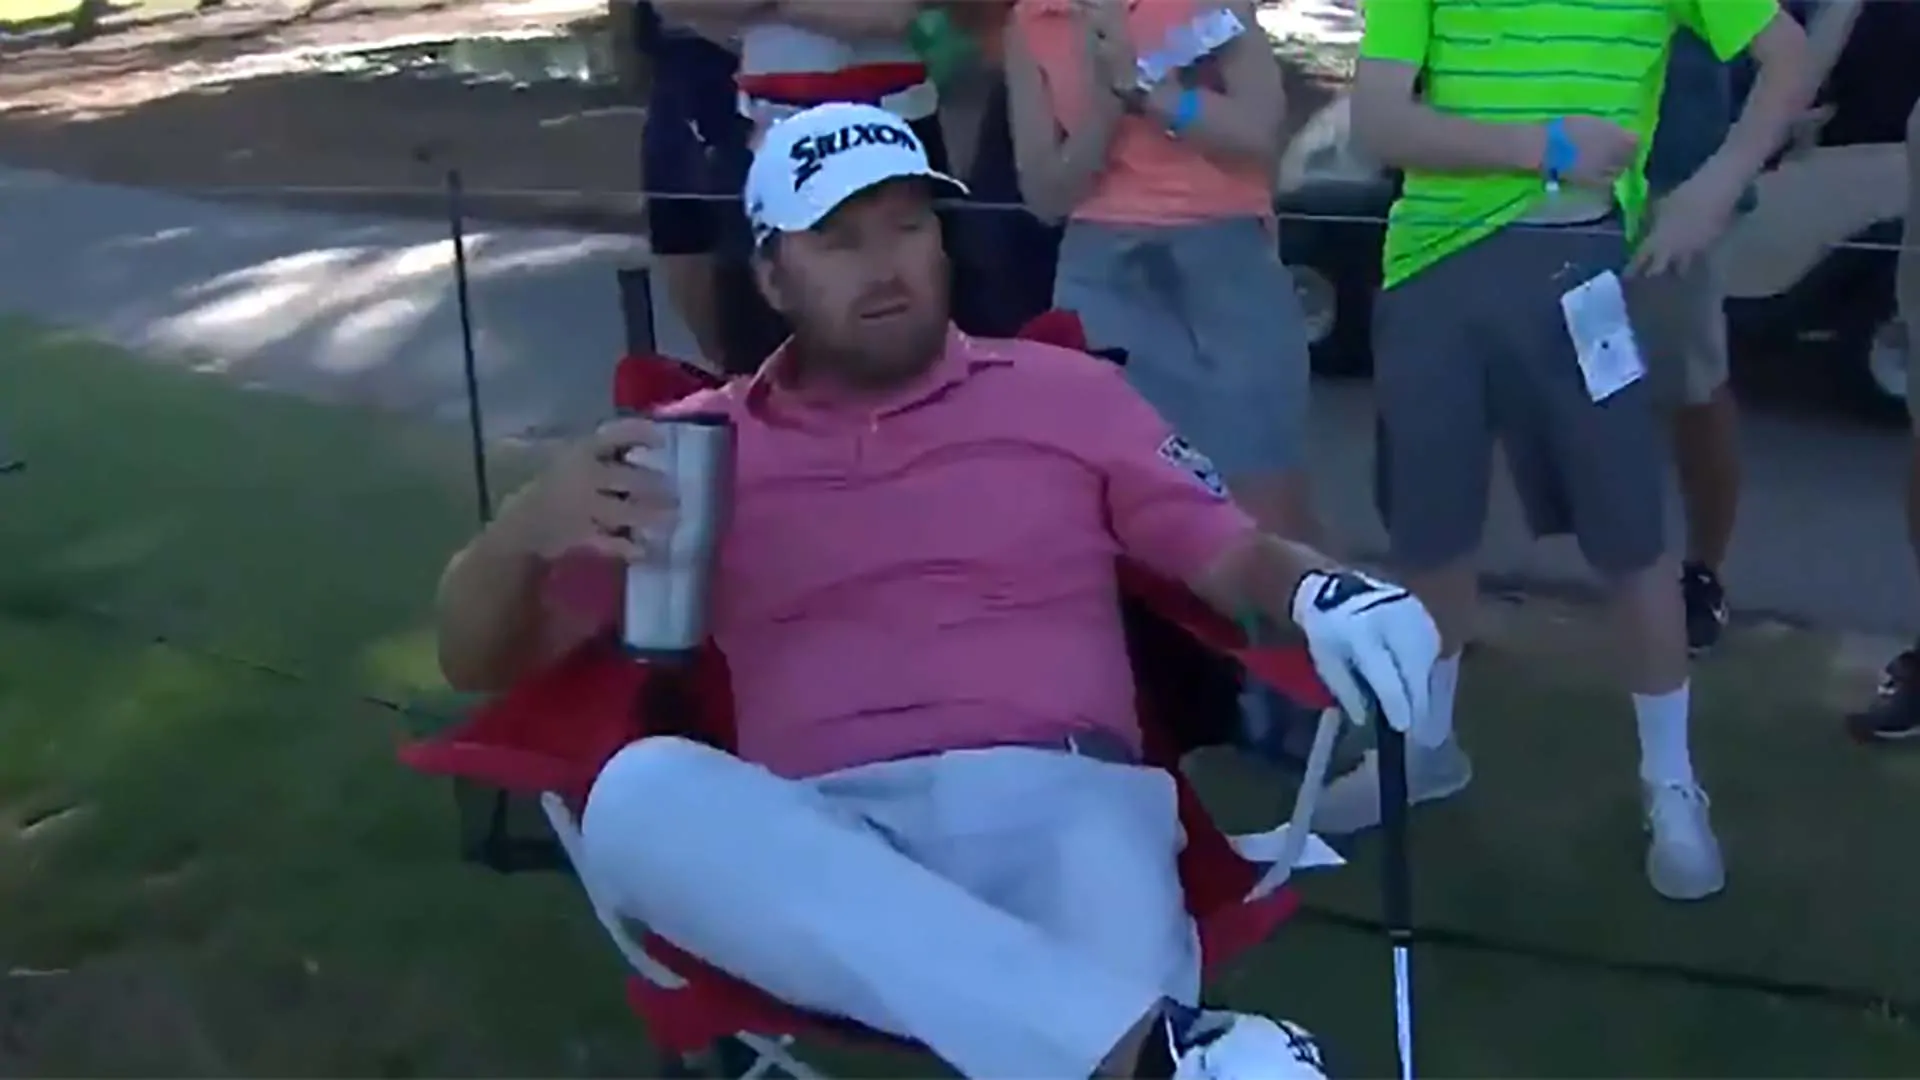 Watch: G-Mac holes out for eagle, celebrates with drink in fan's chair